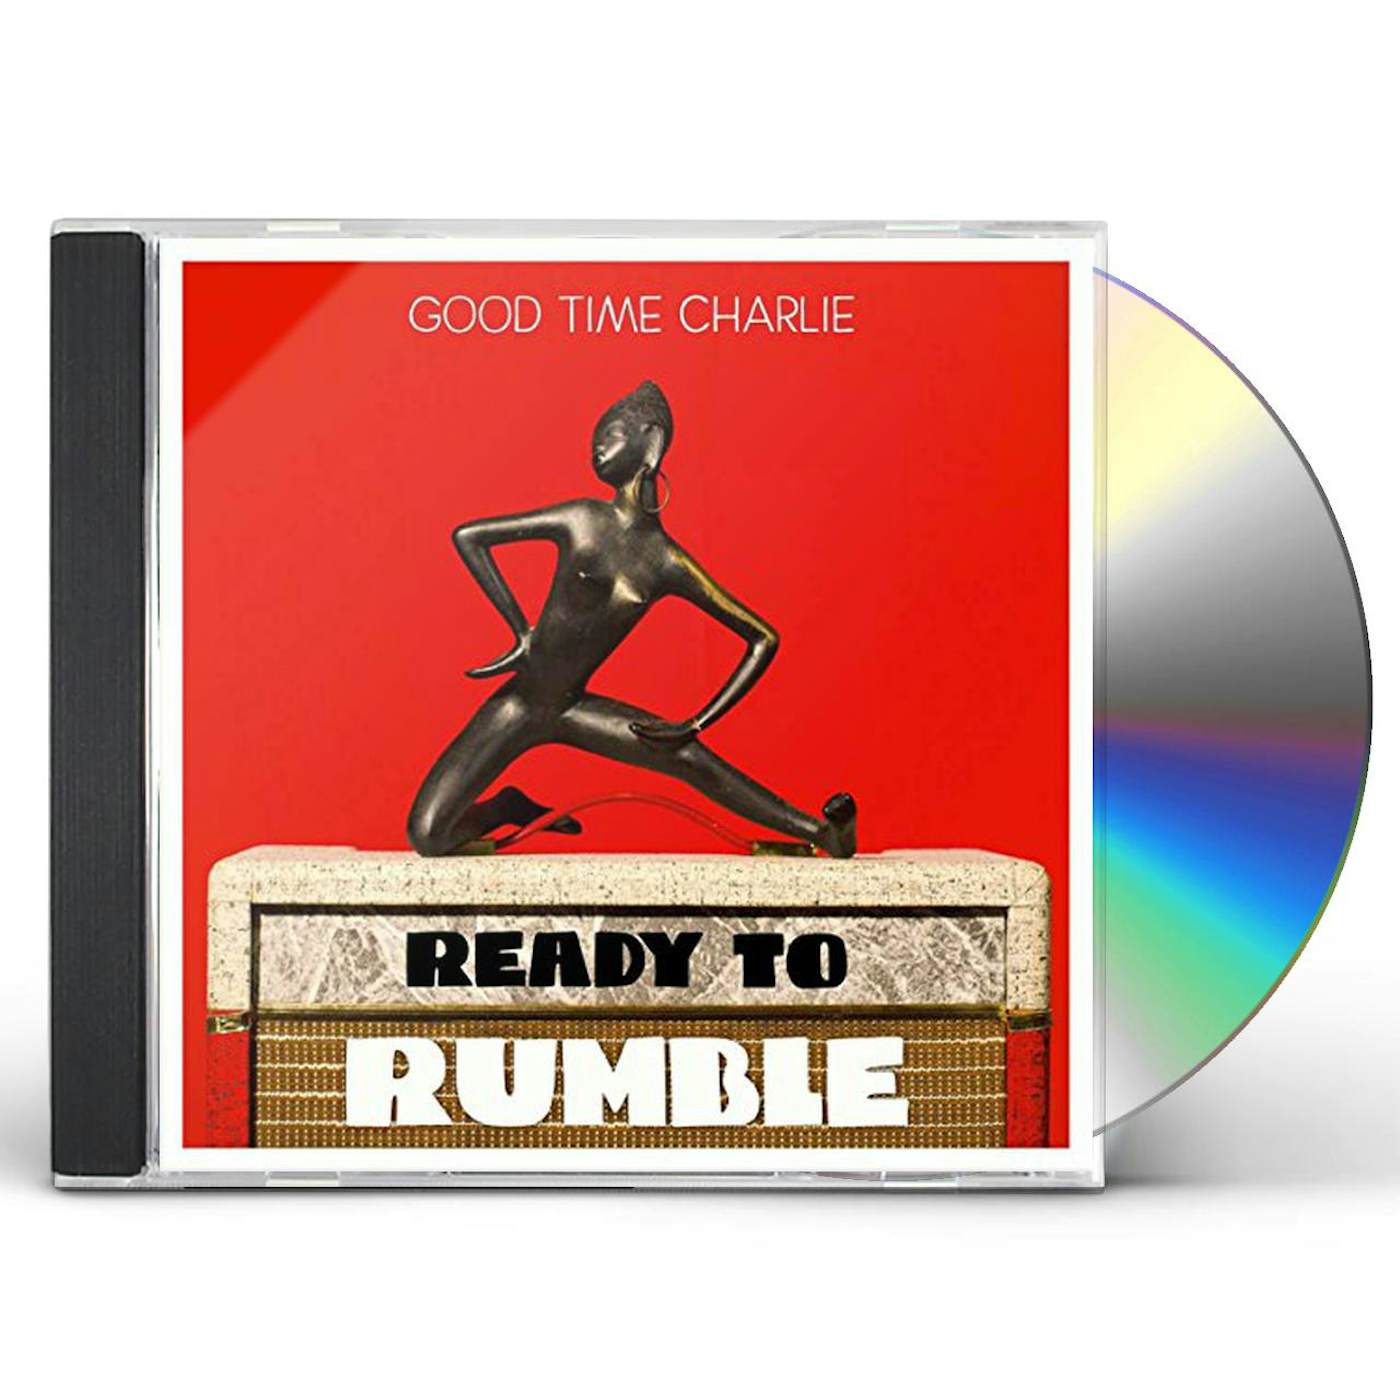 Good Time Charlie READY TO RUMBLE CD